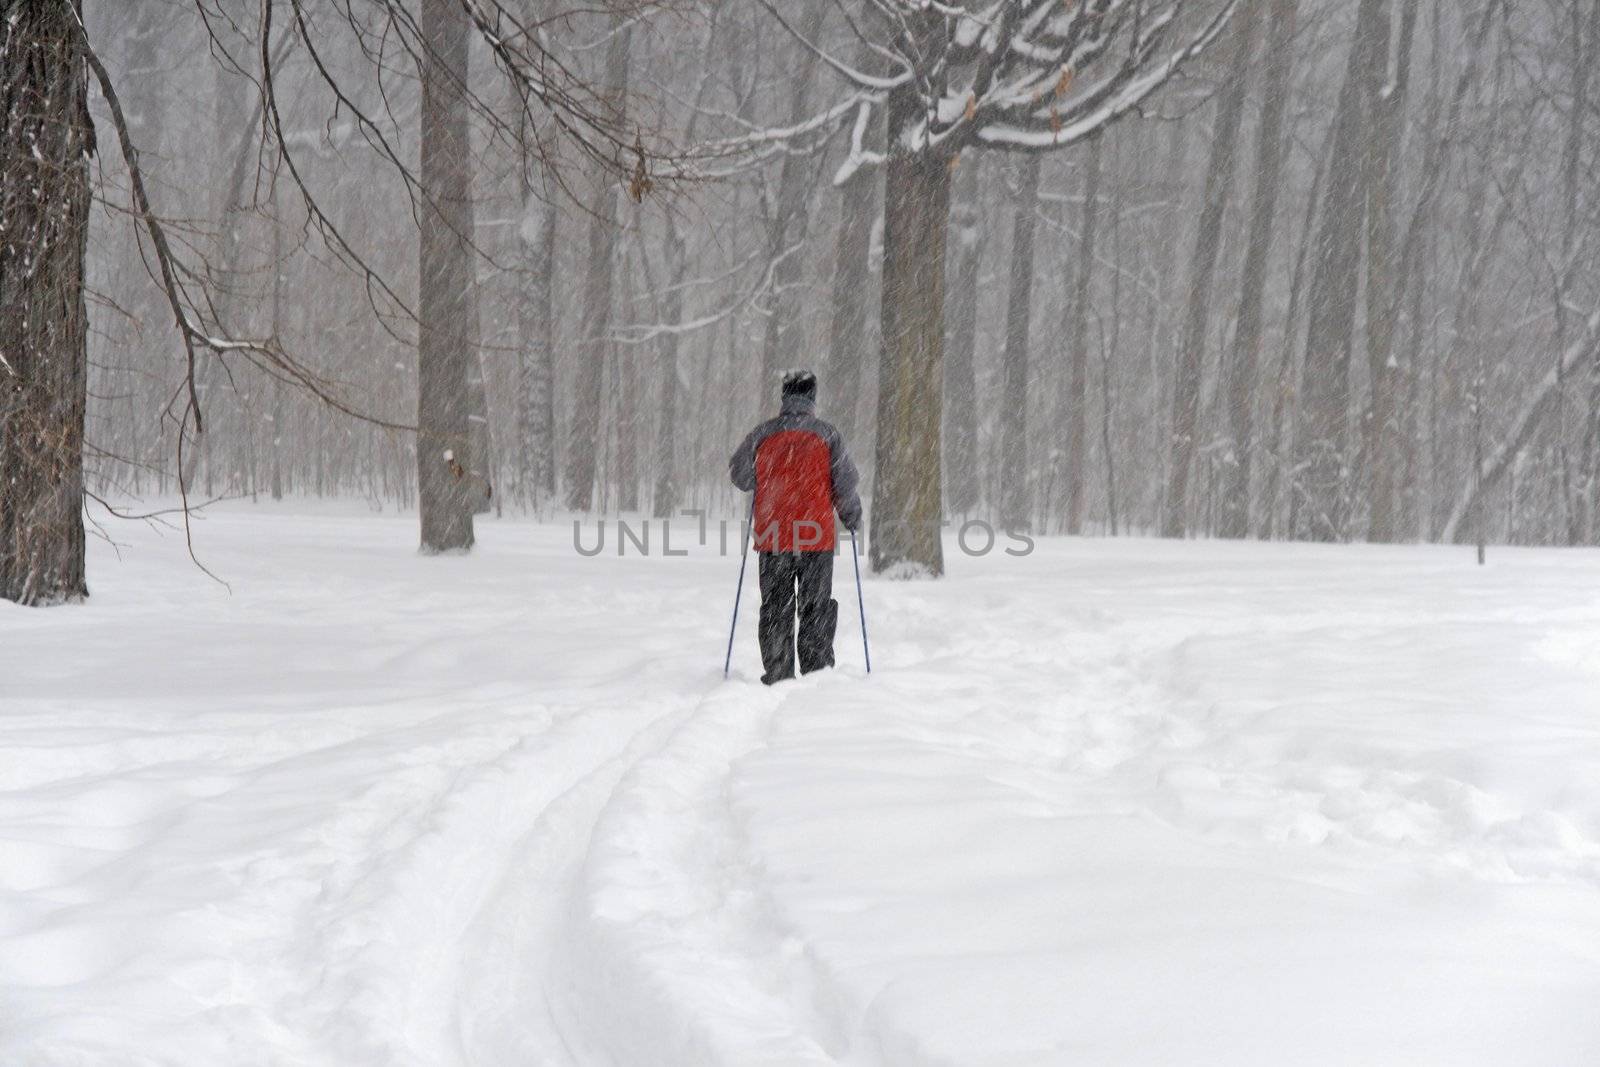 Man skiing in a forest during a snowfall.